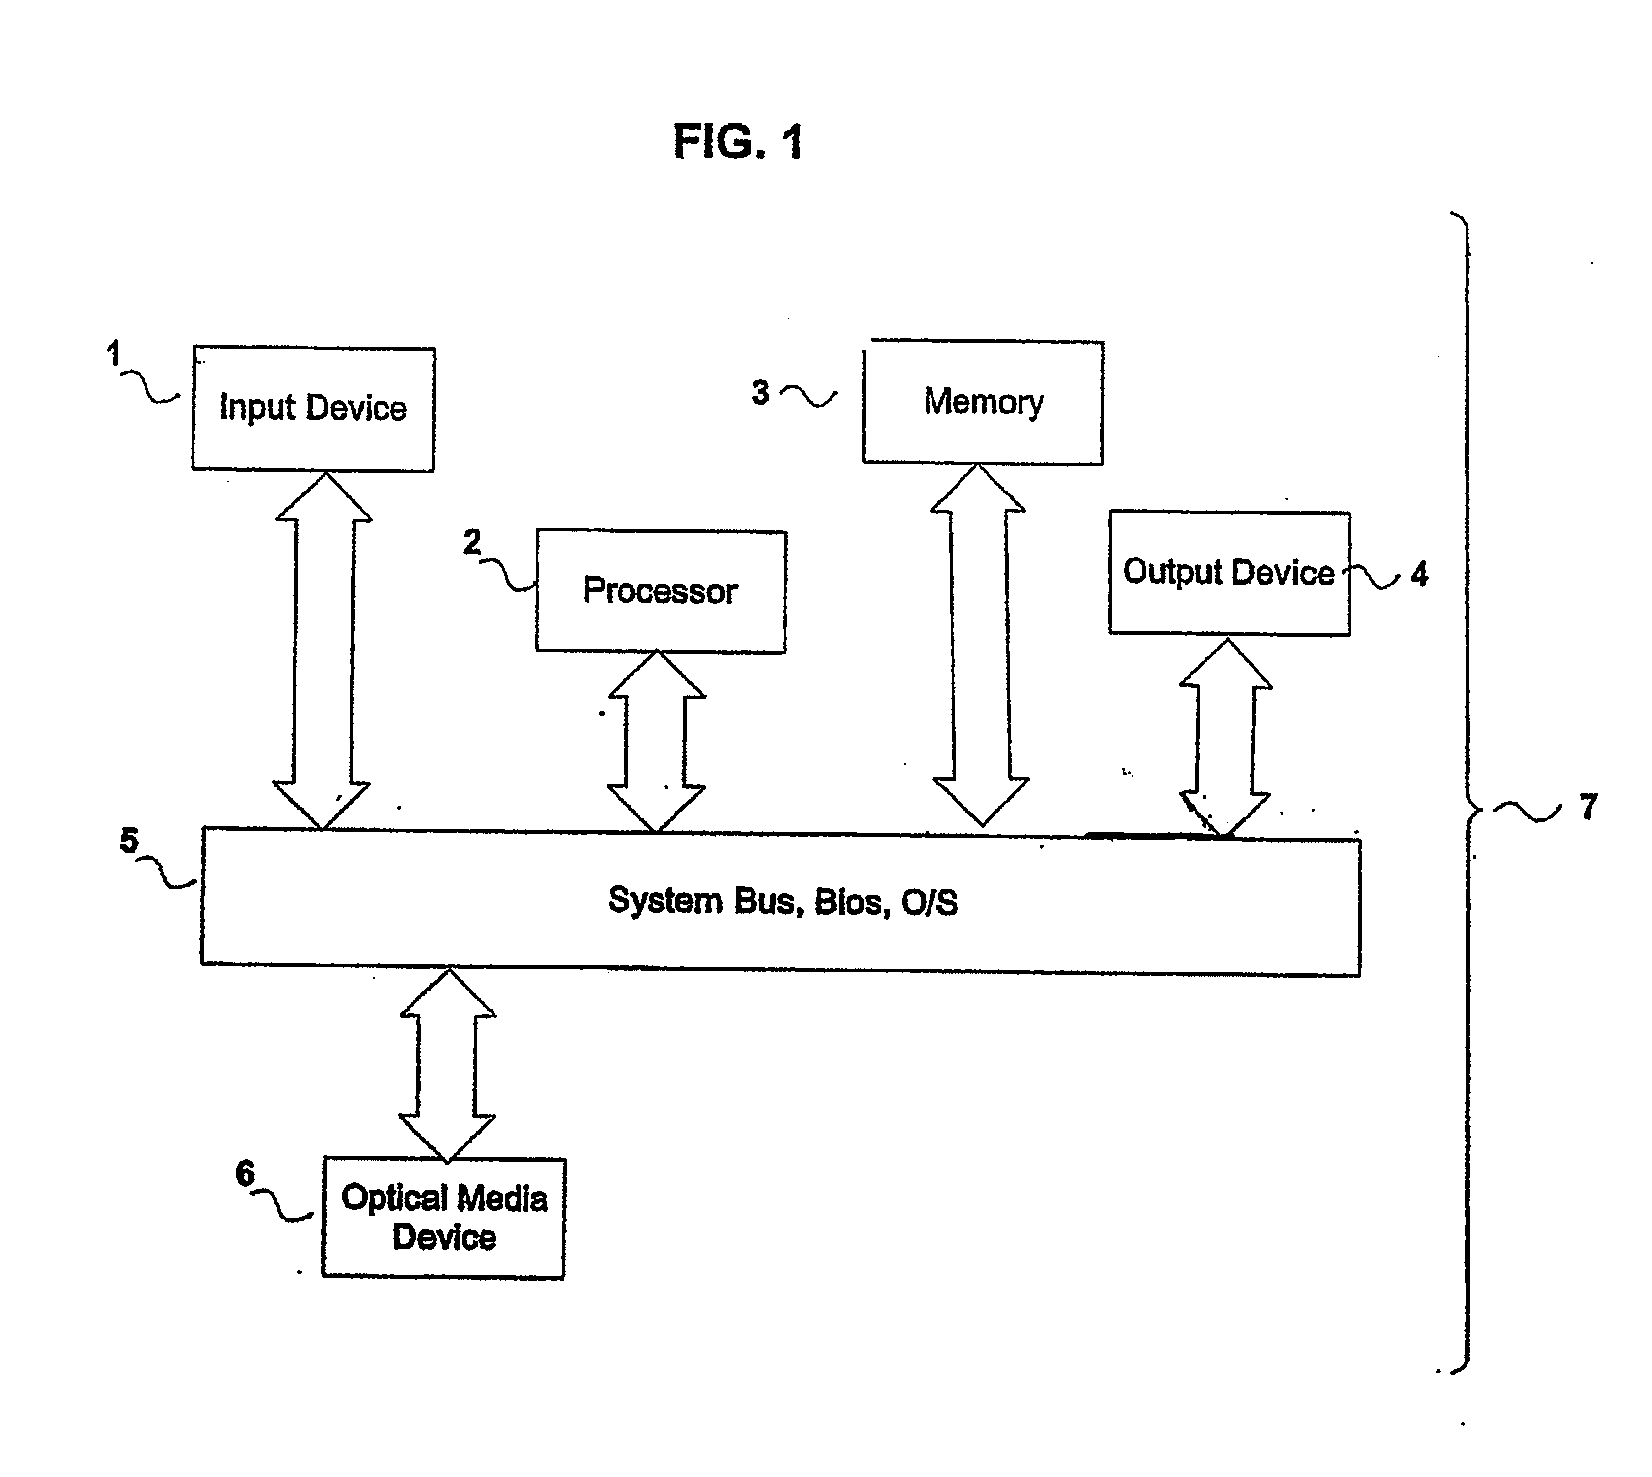 Systems and methods for the prevention of unauthorized use and manipulation of digital content